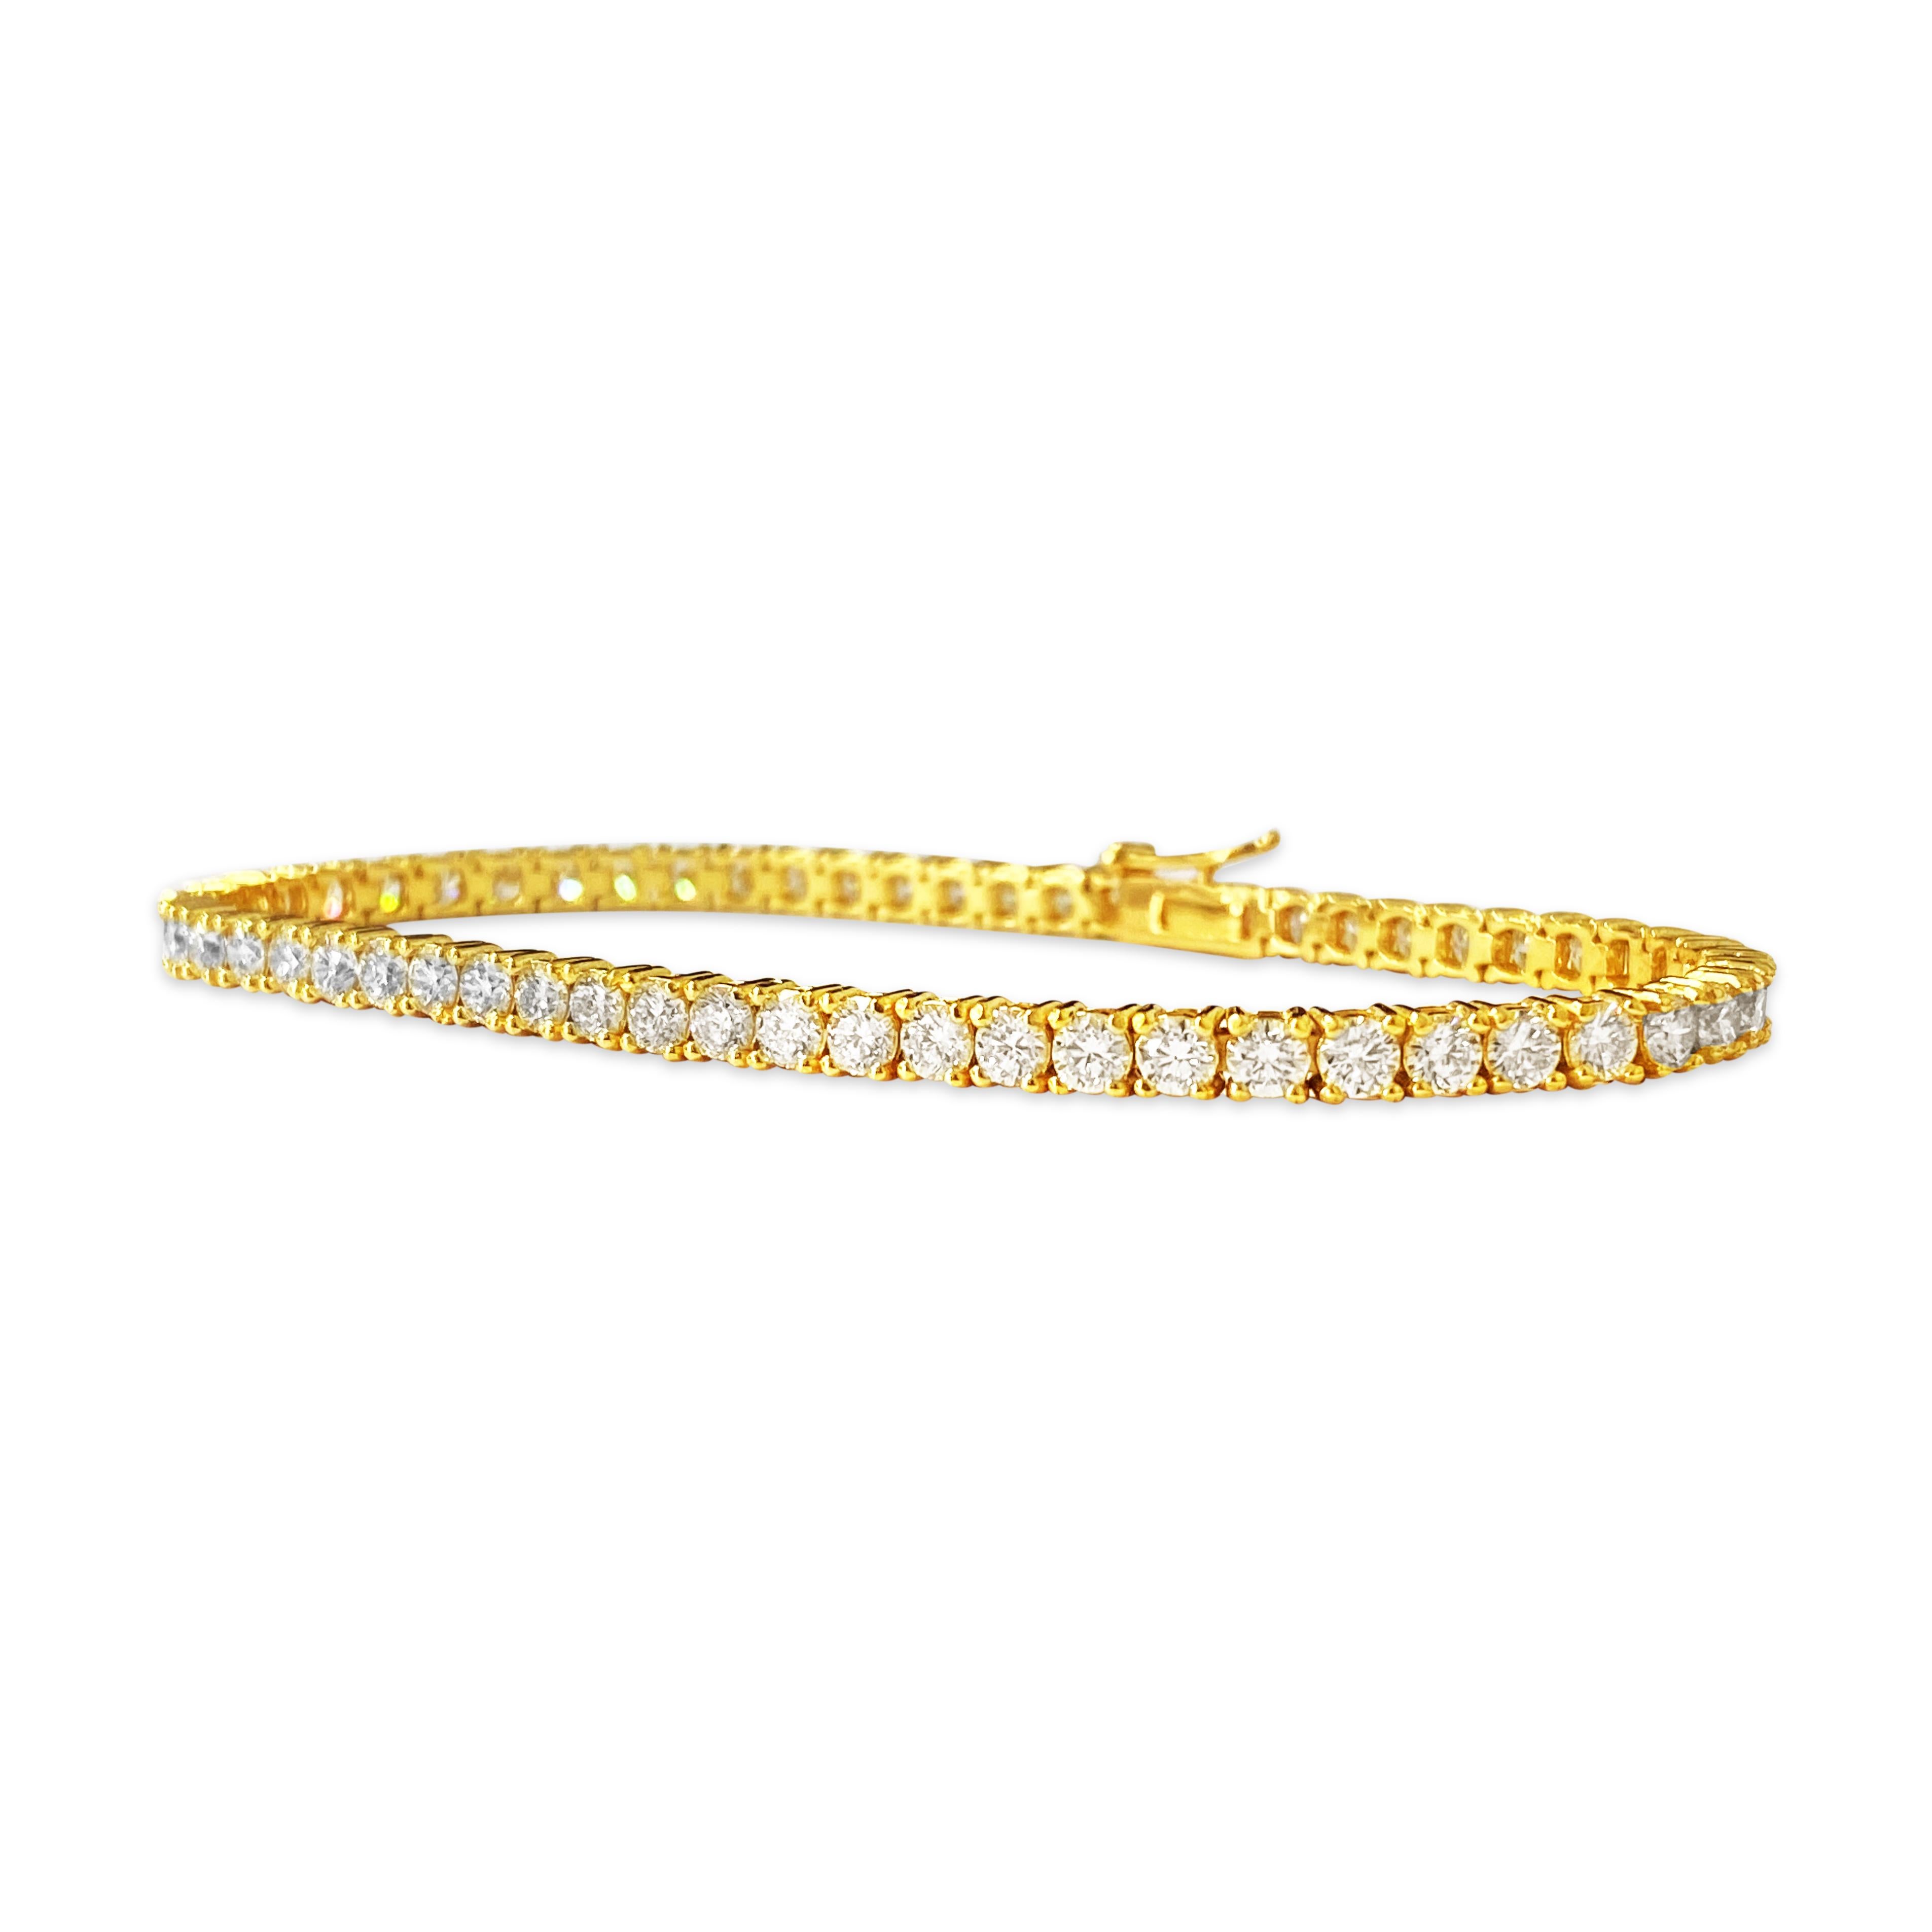 Metal: 14k yellow gold. 
Diamonds: 5.60 cwt. 
VVS clarity. H color. 
Round brilliant cut. 
57 stones total. 100% natural earth mined diamonds set in prongs. 
7 inches long. 
Brand new unisex diamond tennis bracelet. Custom made piece. Premium